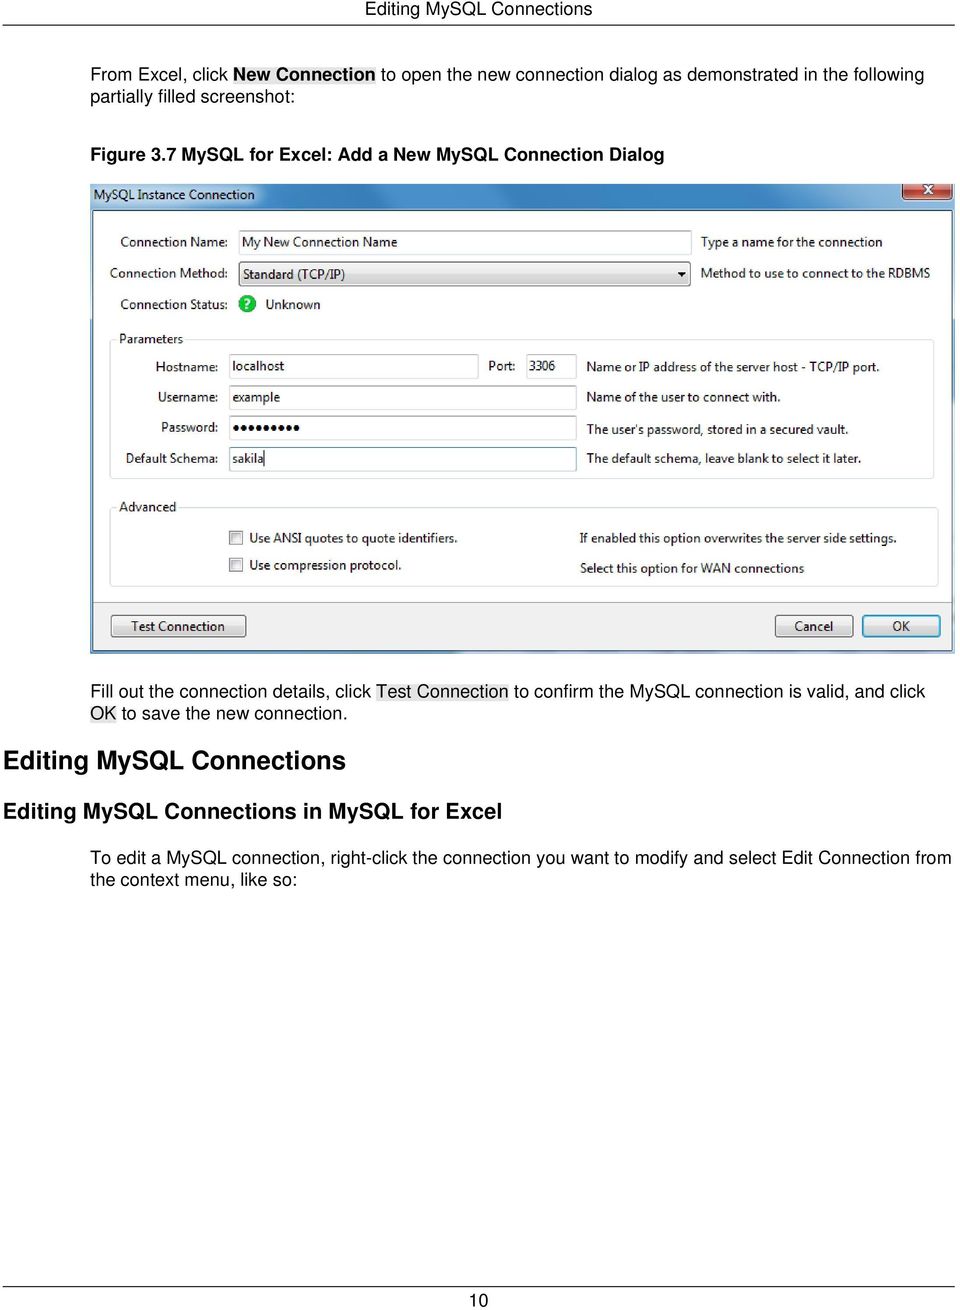 7 MySQL for Excel: Add a New MySQL Connection Dialog Fill out the connection details, click Test Connection to confirm the MySQL connection